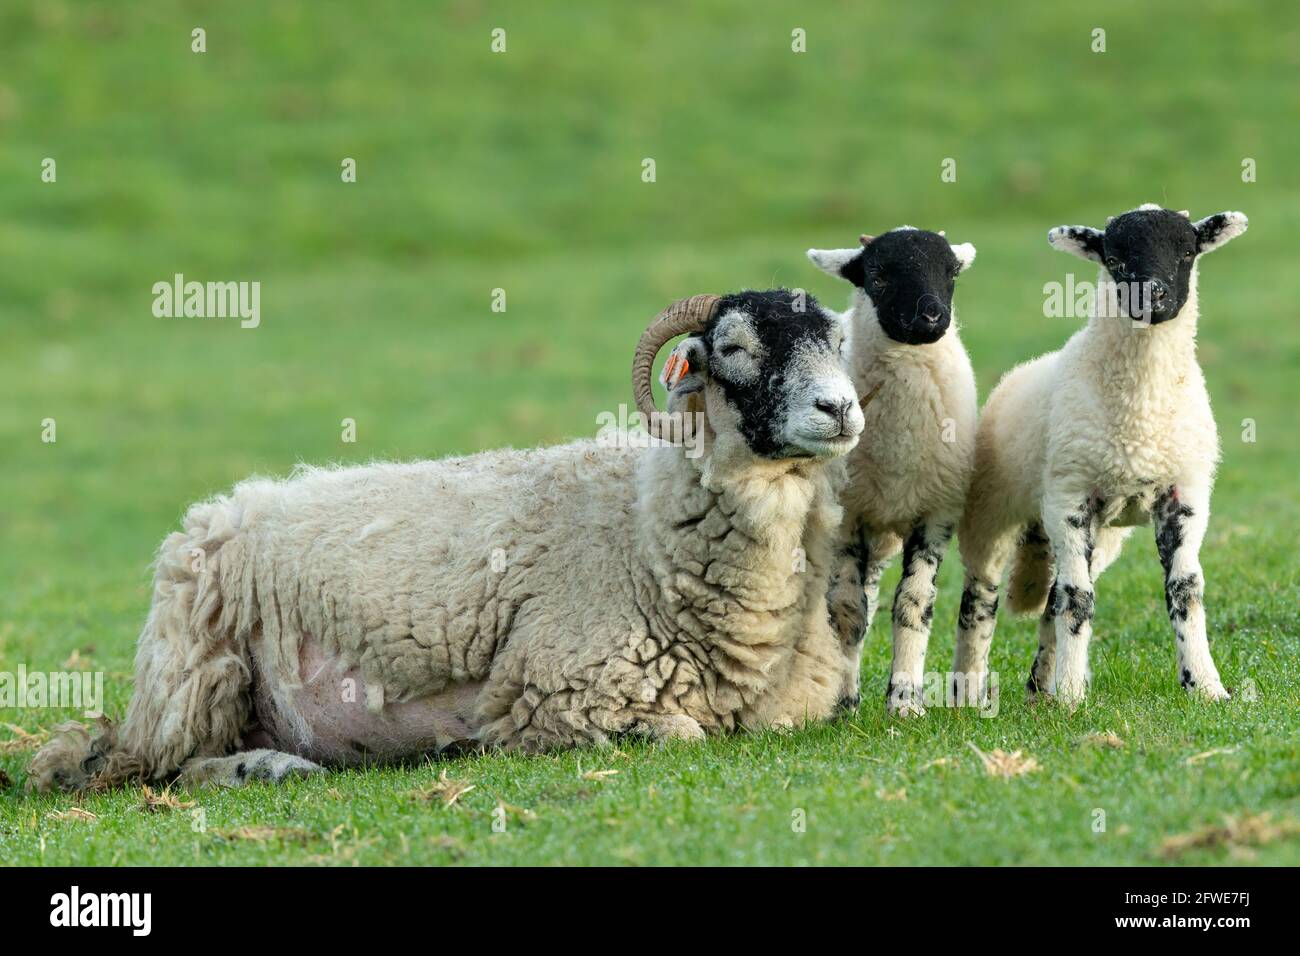 Swaledale ewe, or female sheep, with her two twin lambs.  A contented, sleeping mother with her lambs staying close beside her.  Keld, North Yorkshire Stock Photo